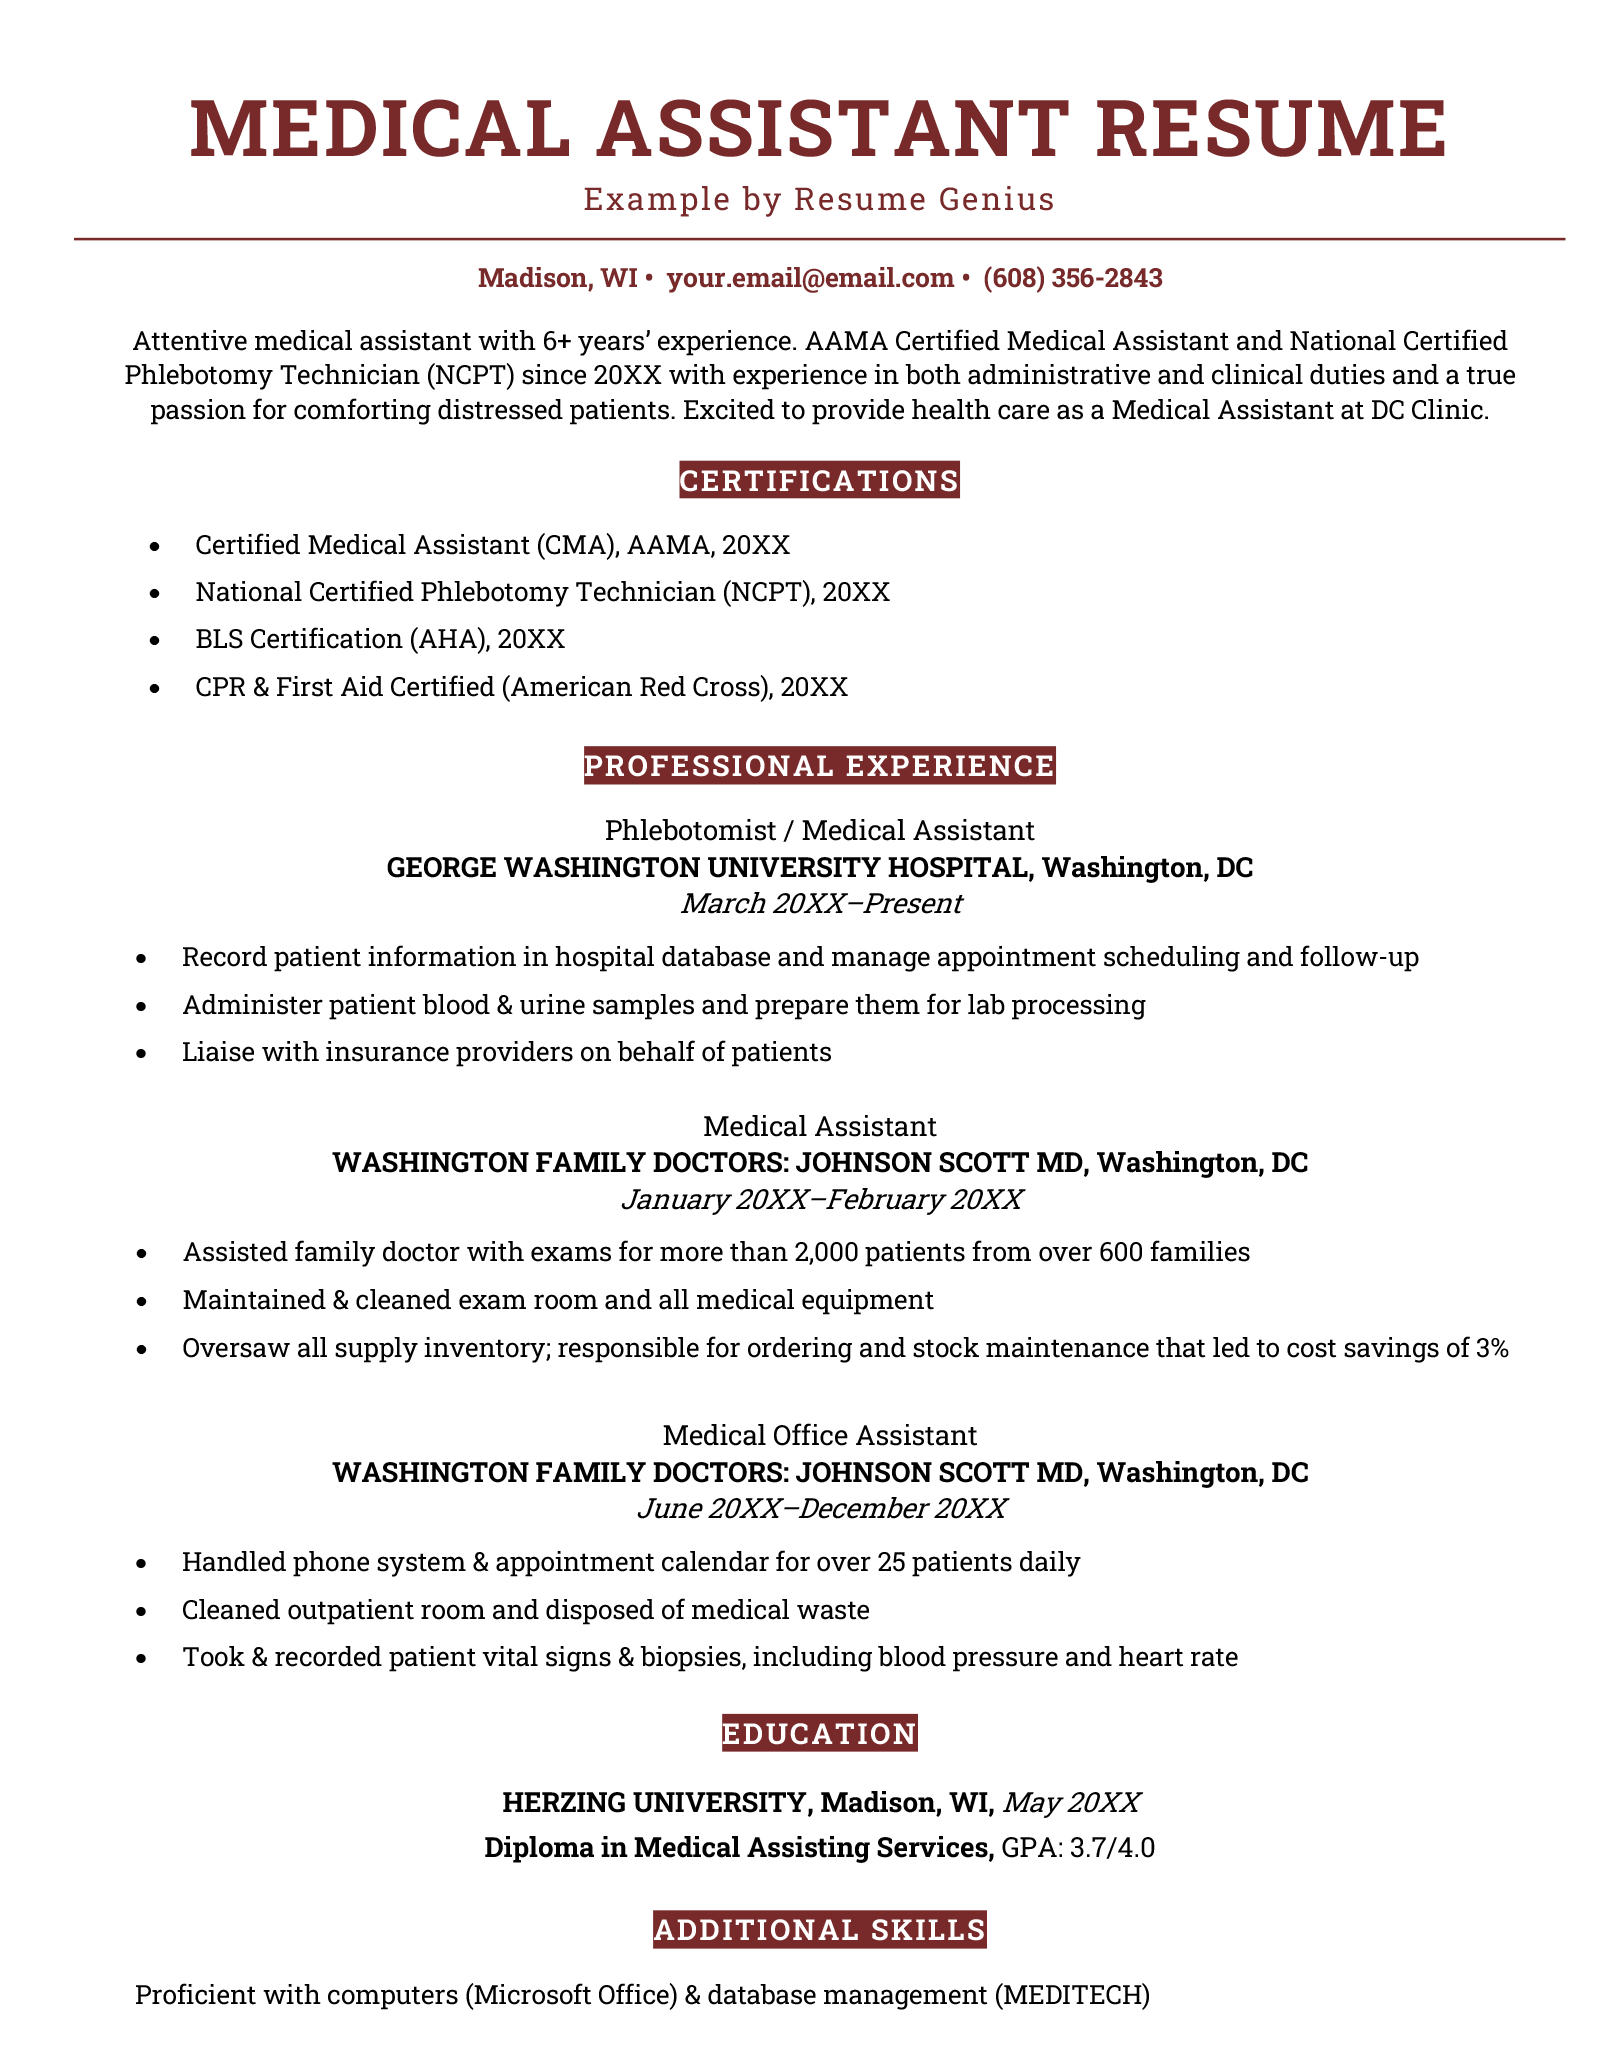 An image of a medical assistant resume example